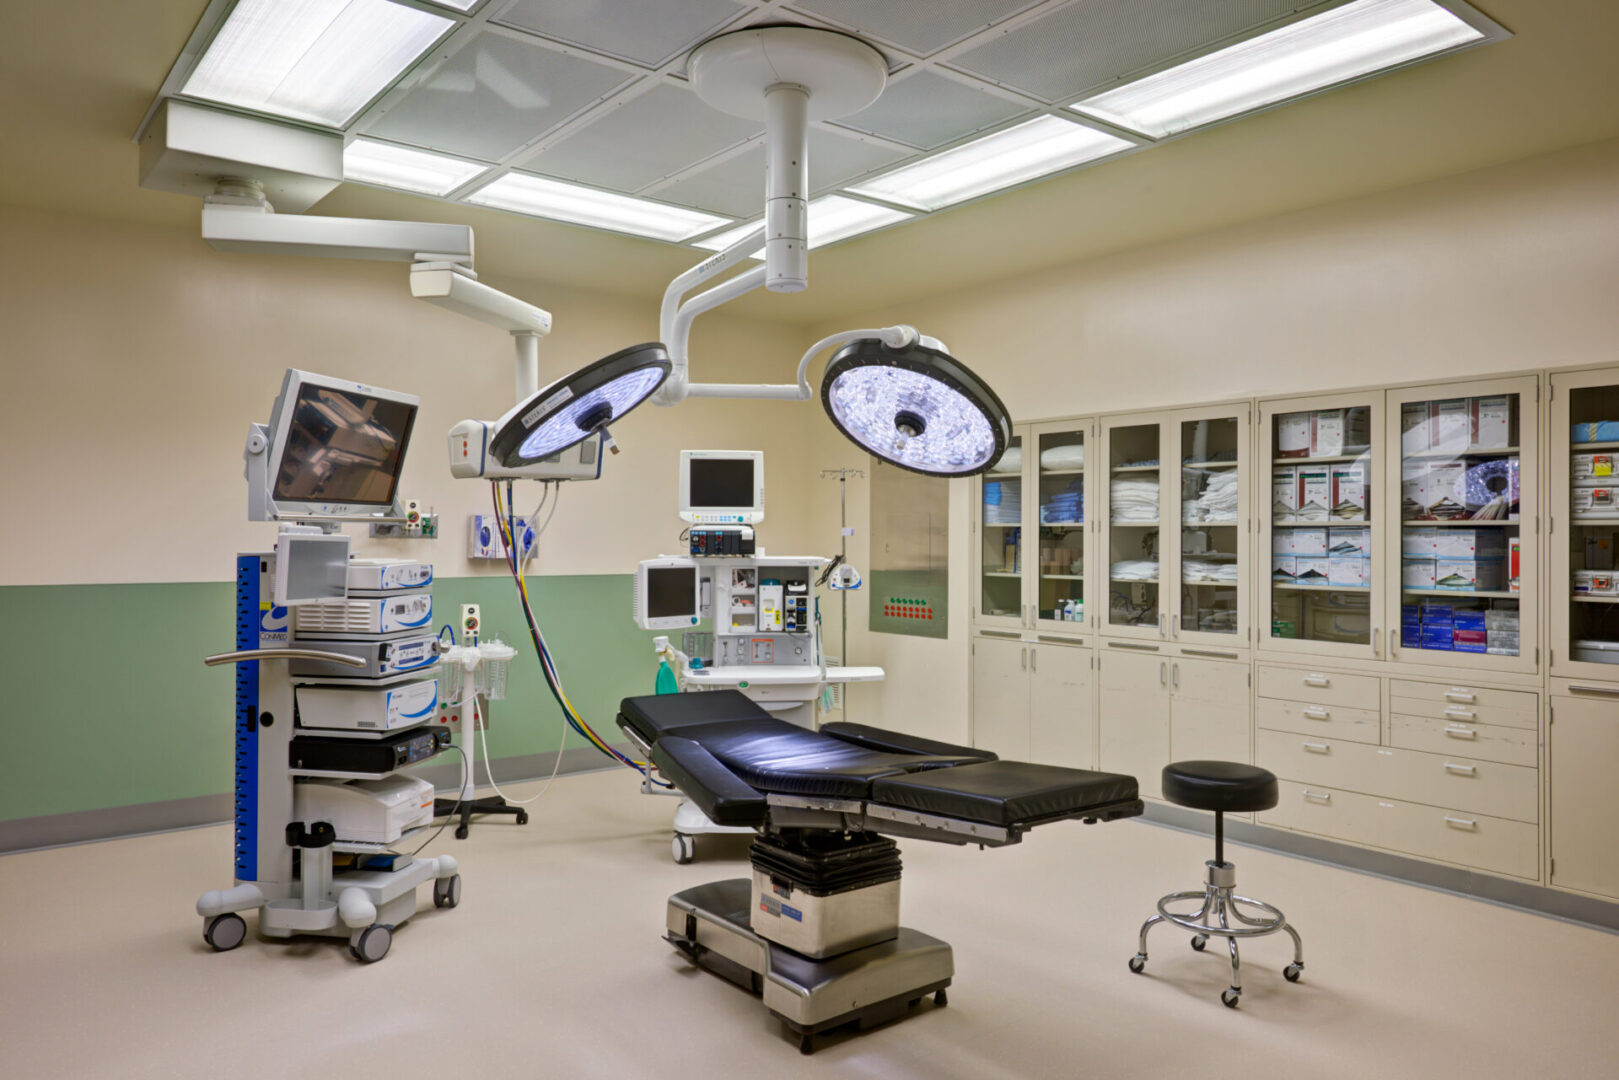 A room with several different types of medical equipment.